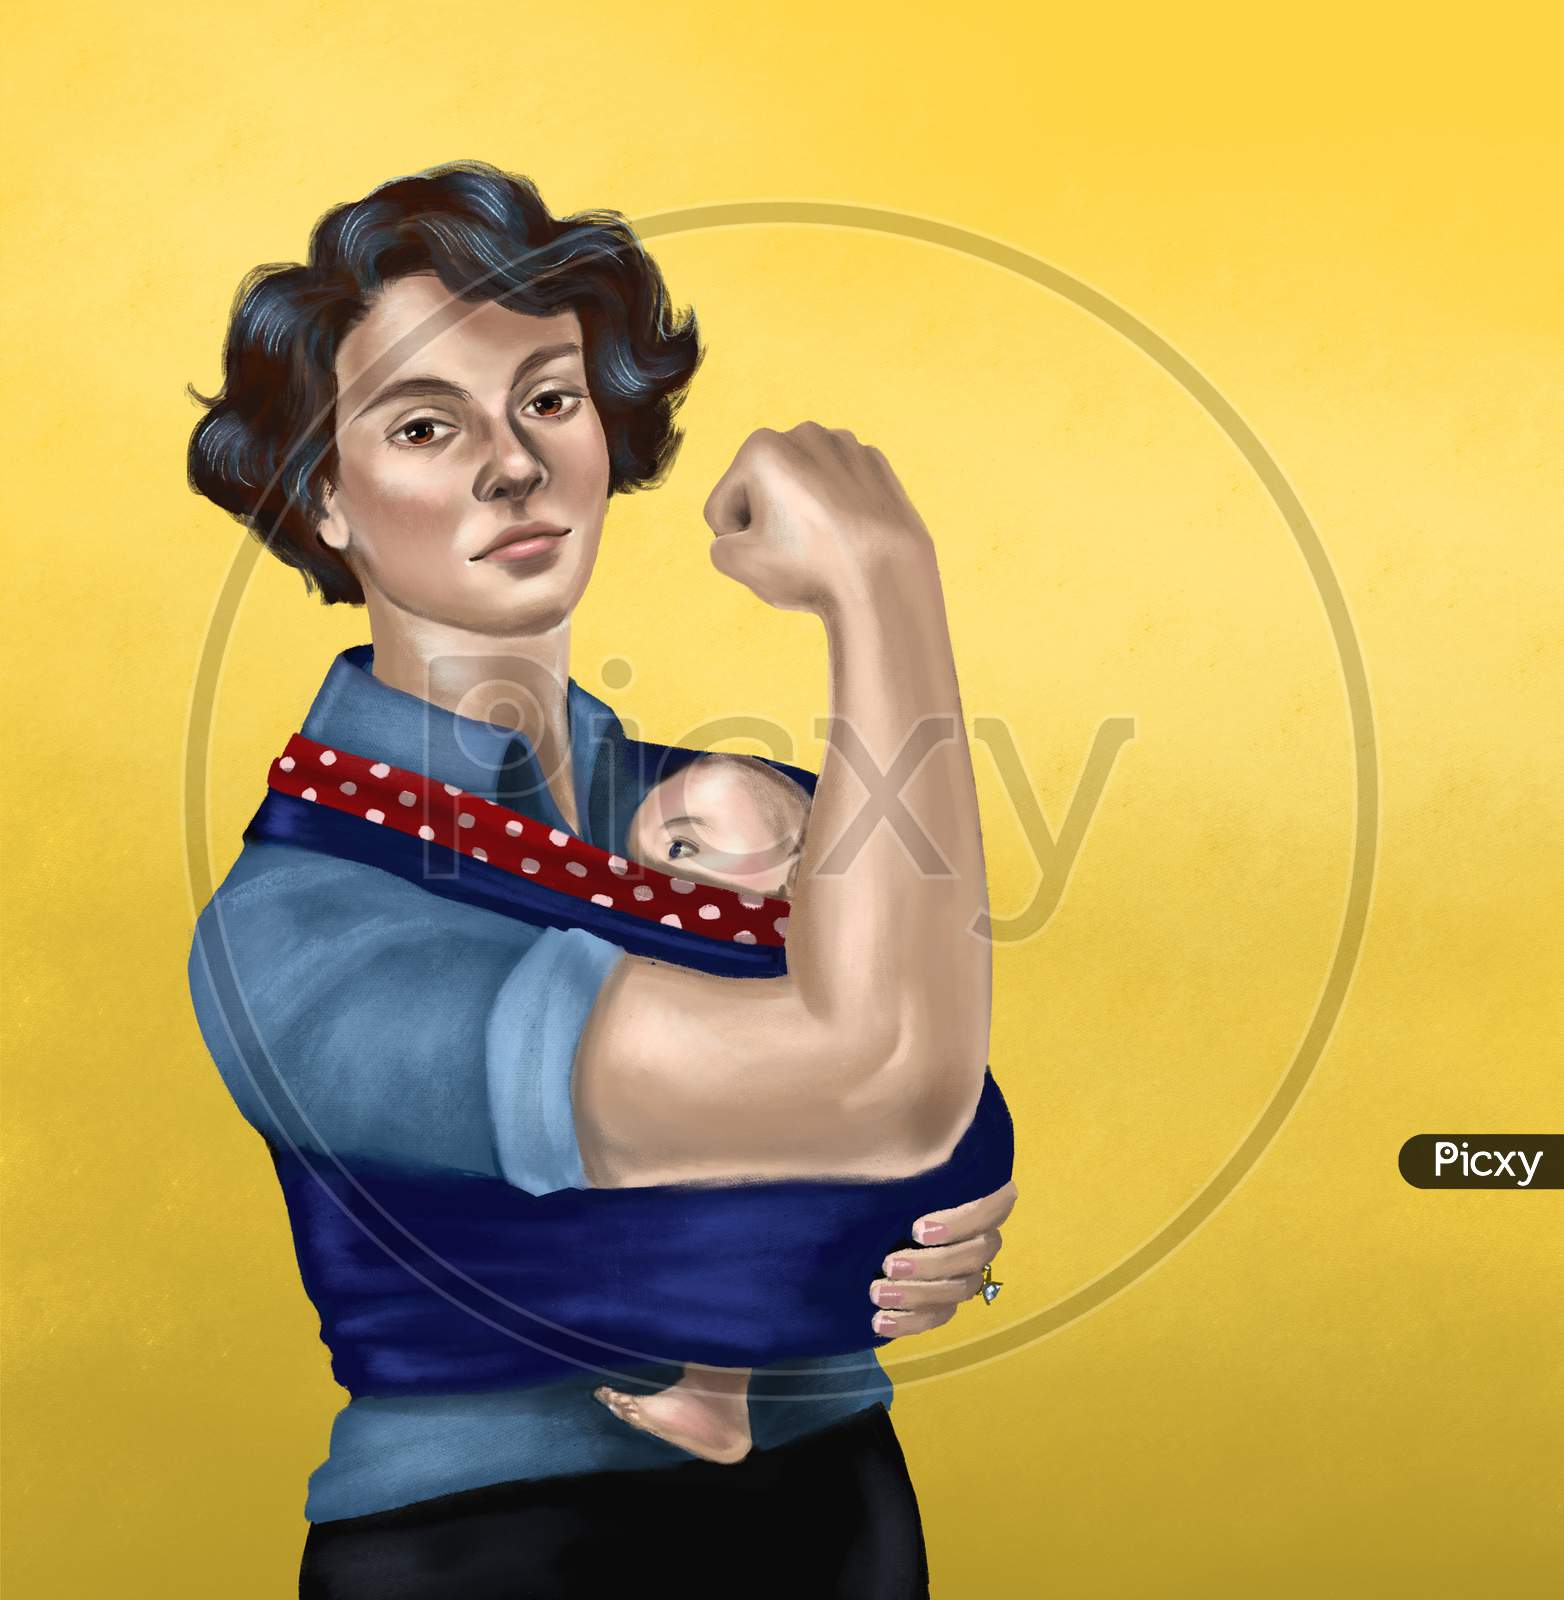 Women empowerment and work from home illustration